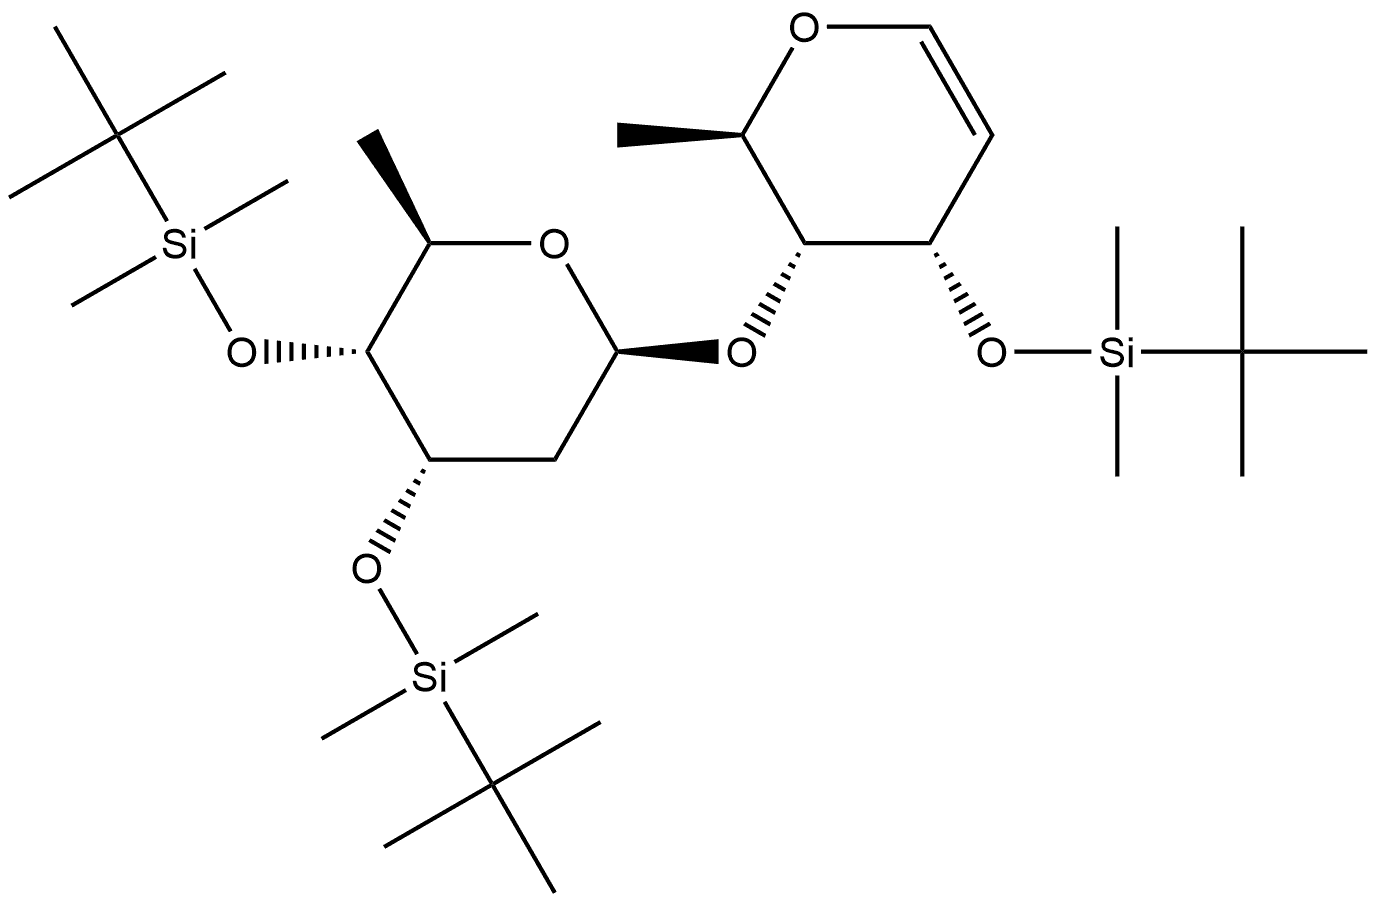 D-ribo-Hex-1-enitol, 1,5-anhydro-2,6-dideoxy-4-O-[2,6-dideoxy-3,4-bis-O-[(1,1-dimethylethyl)dimethylsilyl]-β-D-ribo-hexopyranosyl]-3-O-[(1,1-dimethylethyl)dimethylsilyl]-,279684-92-3,结构式